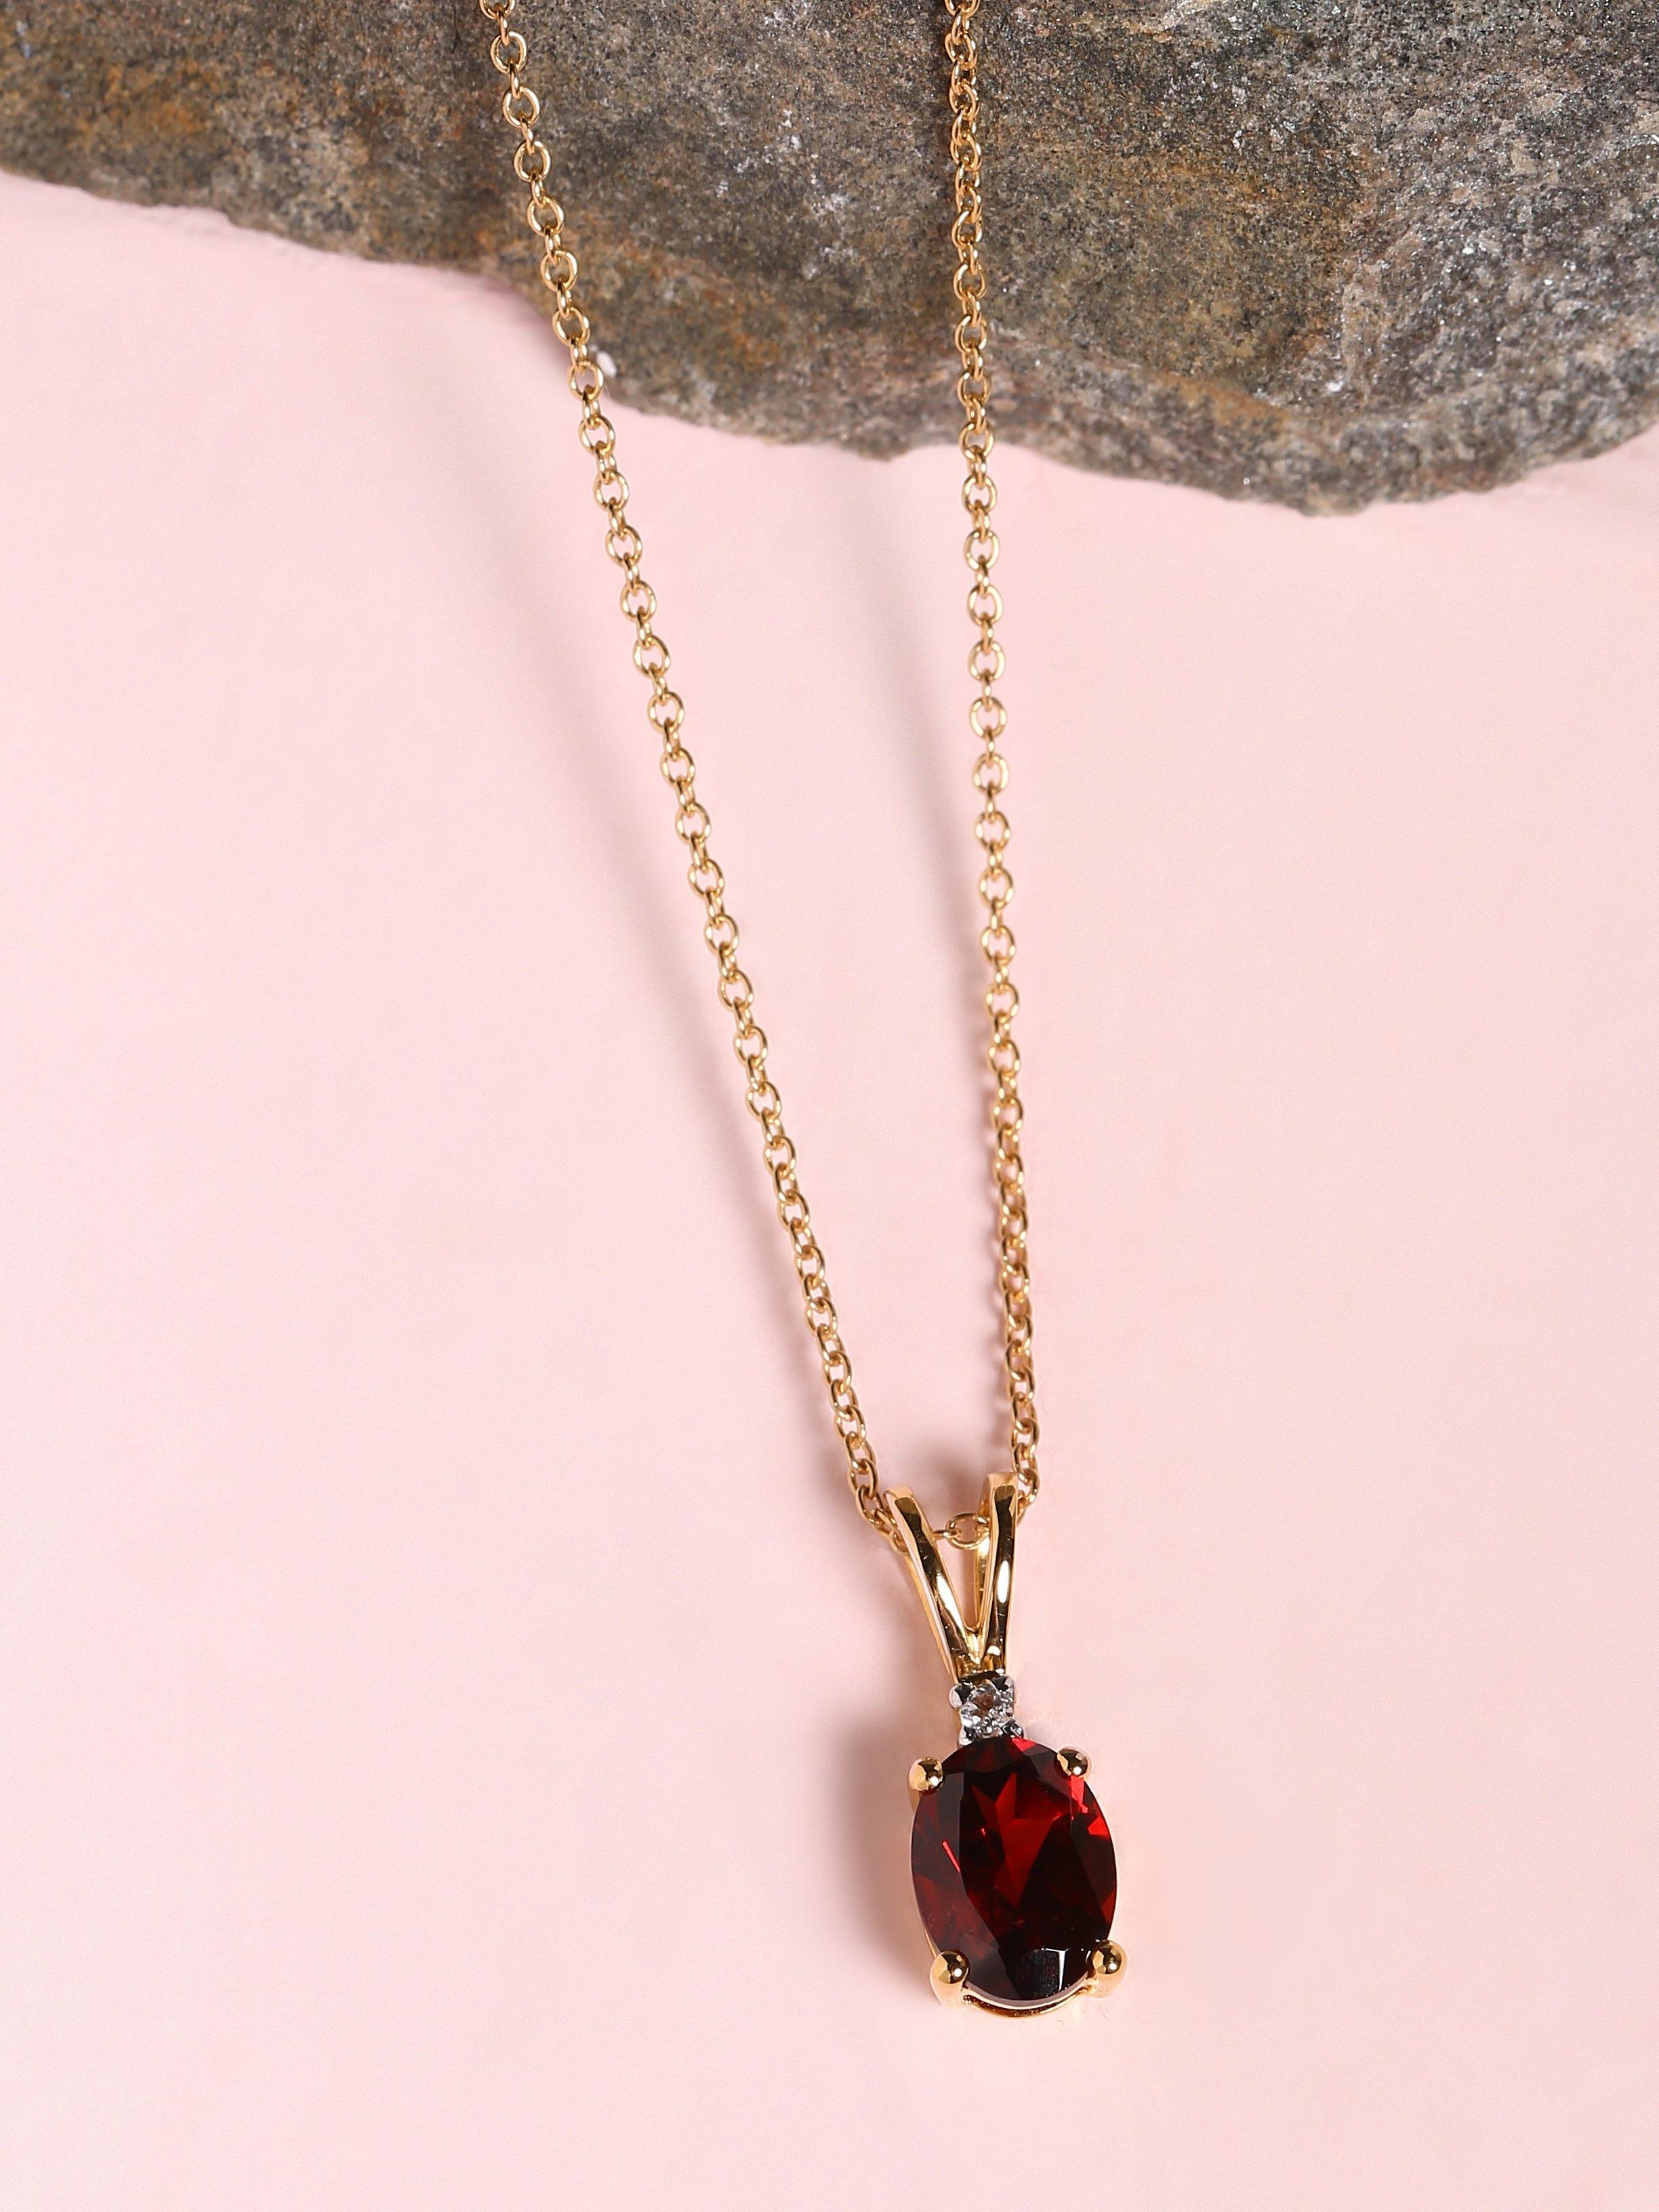 1.42 Ct. Red Garnet Solid 10k Yellow Gold Chain Pendant Necklace Jewelry - YoTreasure